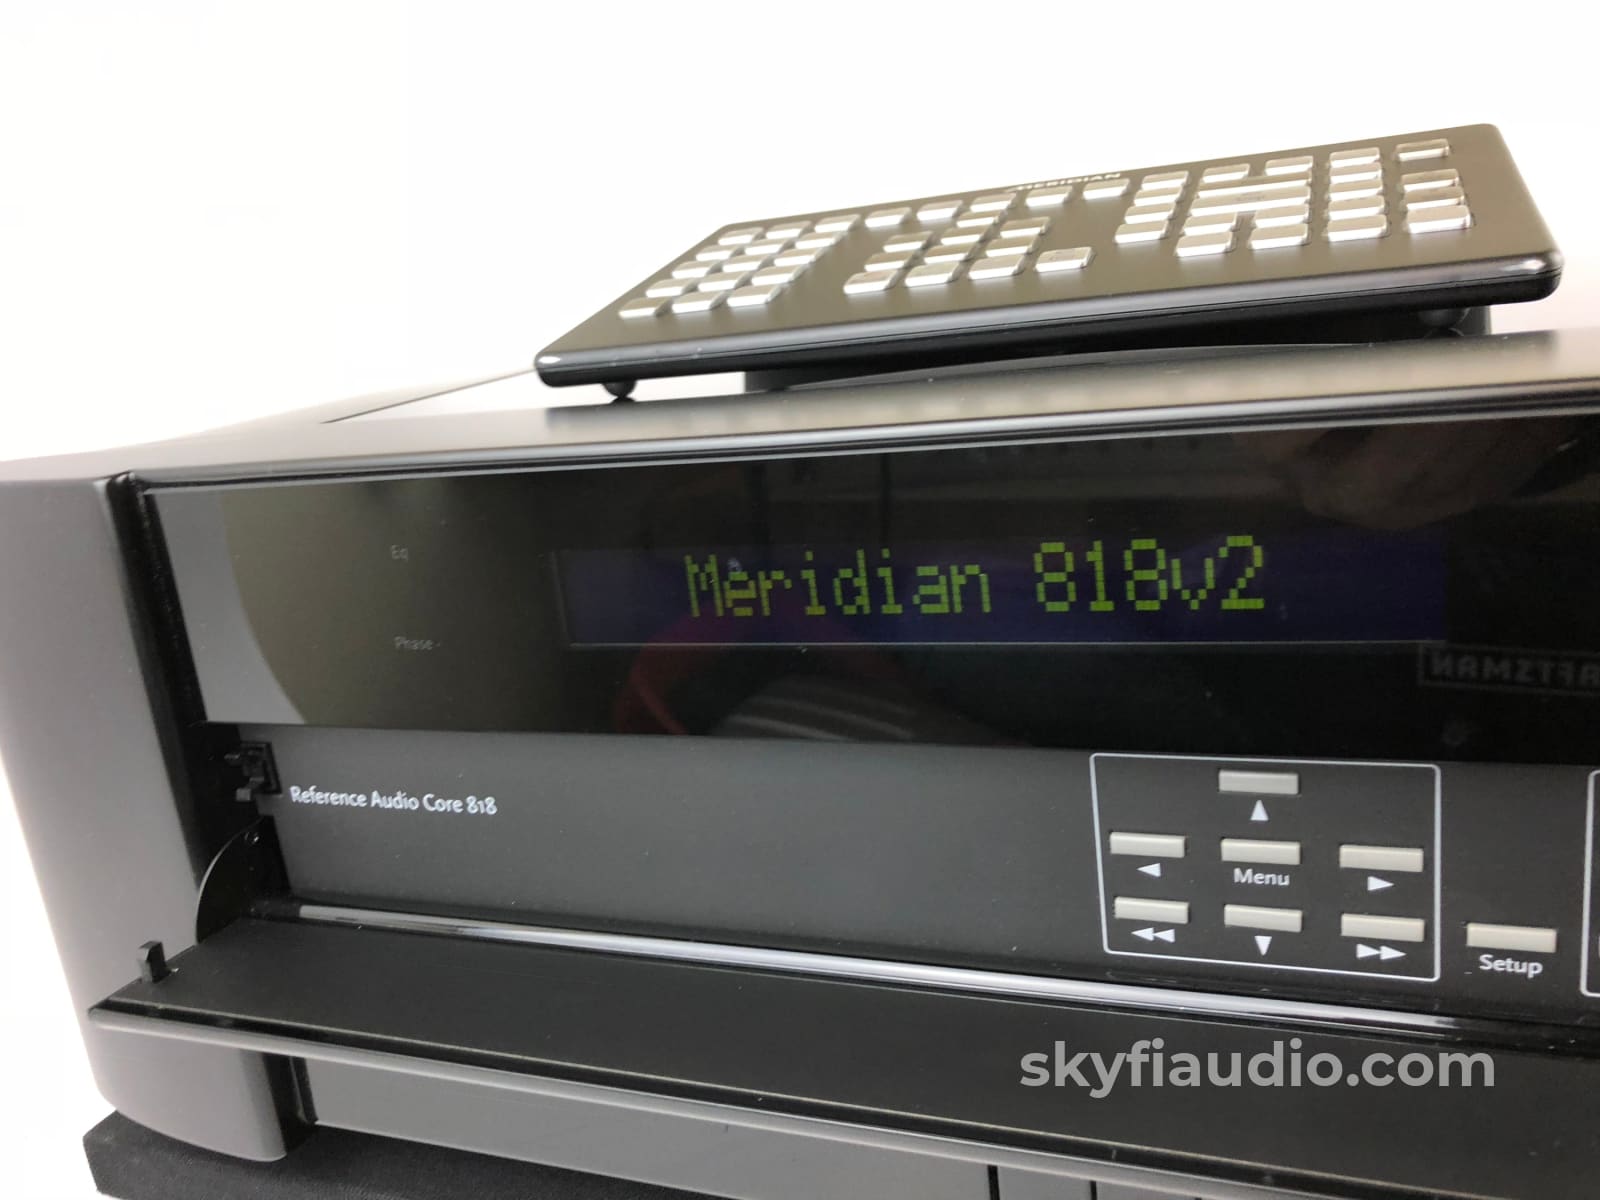 Meridian 818V2 Modular Preamp - Reference Audio Core Mint Condition And Complete Preamplifier